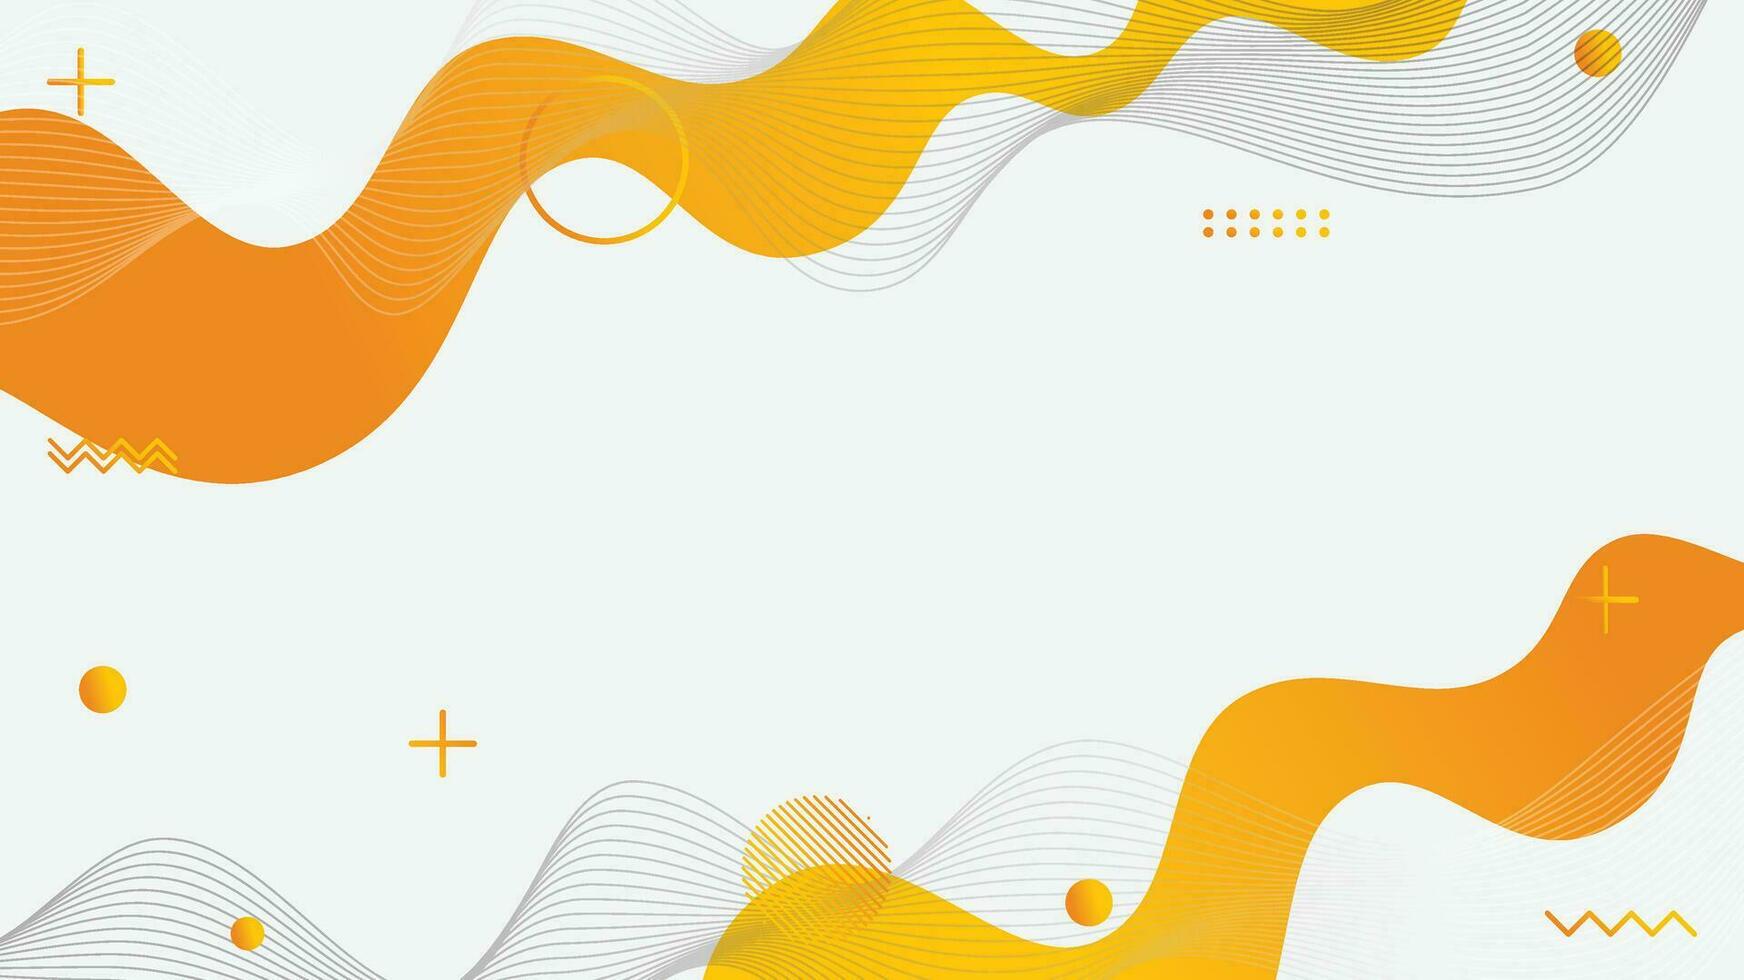 white and yellow fluid shapes abstract background vector